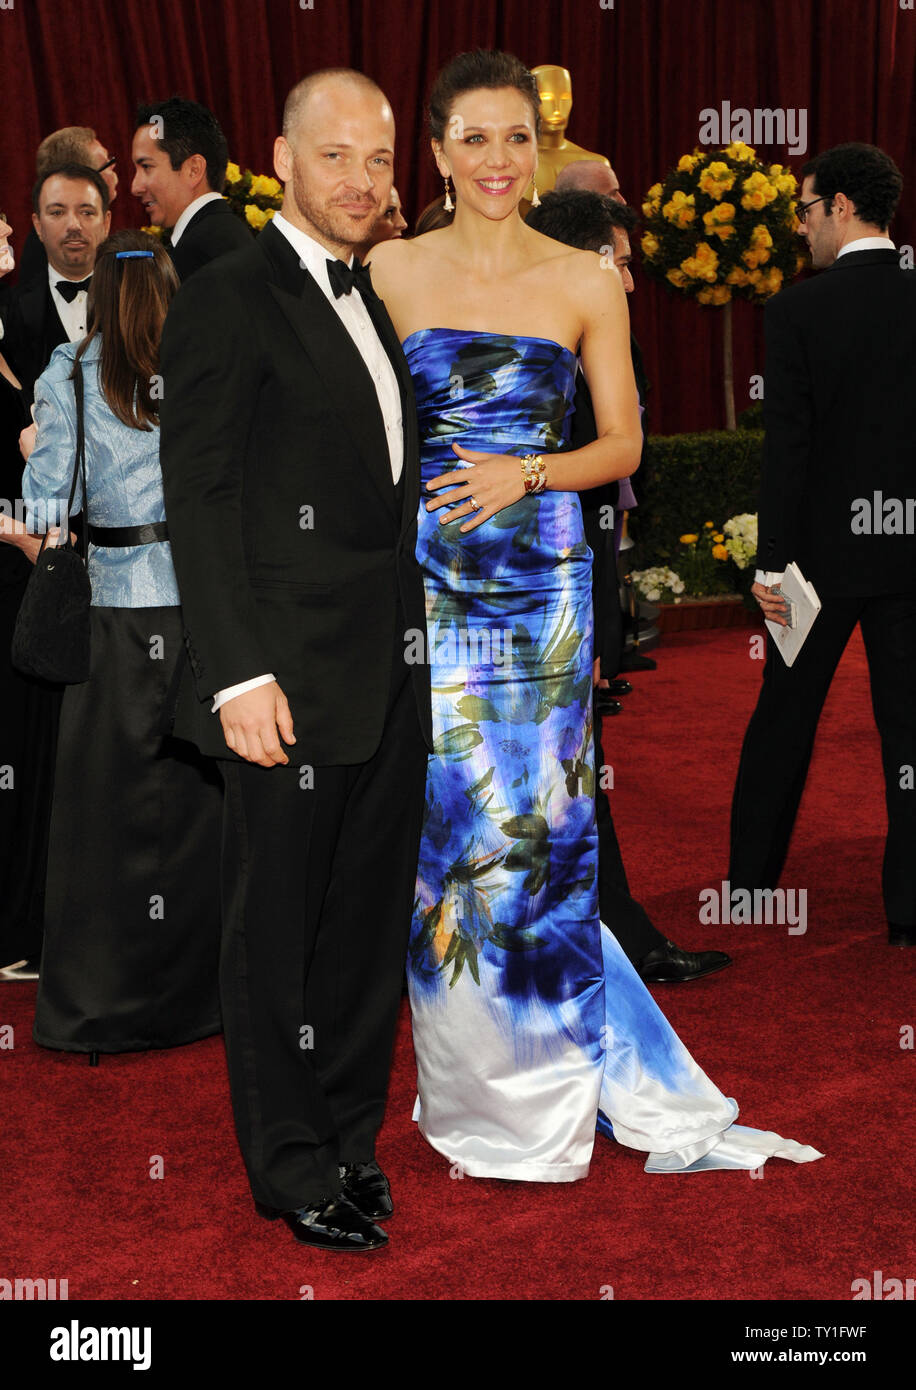 Actress Maggie Gyllenhaal and her husband, actor Peter Sarsgaard arrive at the 82nd annual Academy Awards in Hollywood on March 7, 2010.     UPI/Jim Ruymen Stock Photo